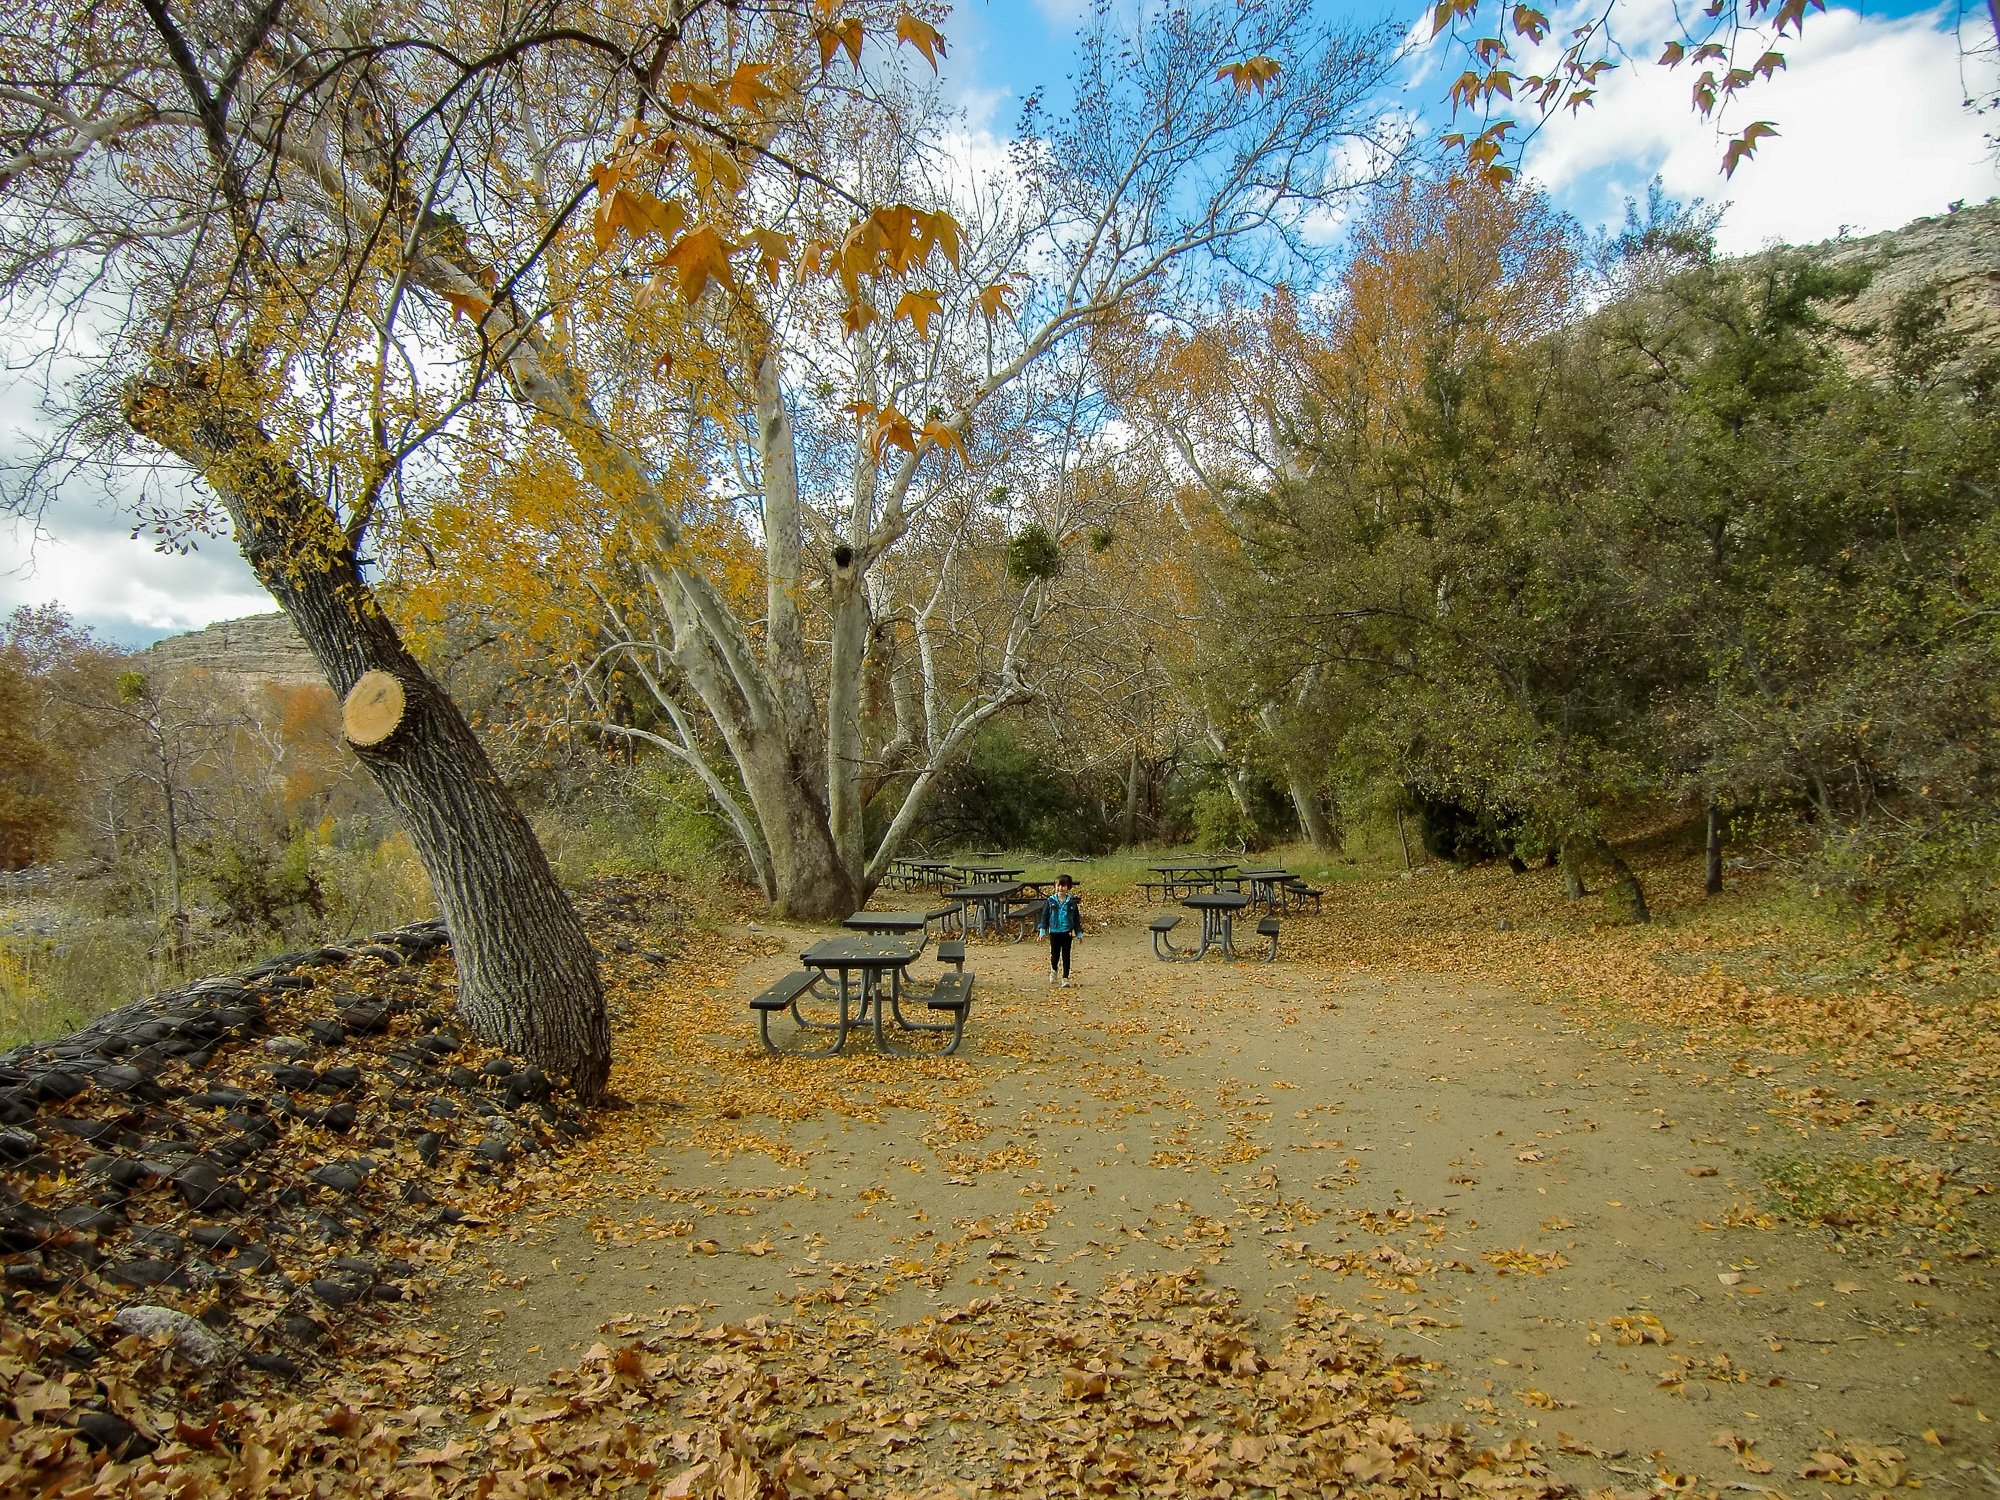 Picnic tables at Montezuma Castle National Monument with kids